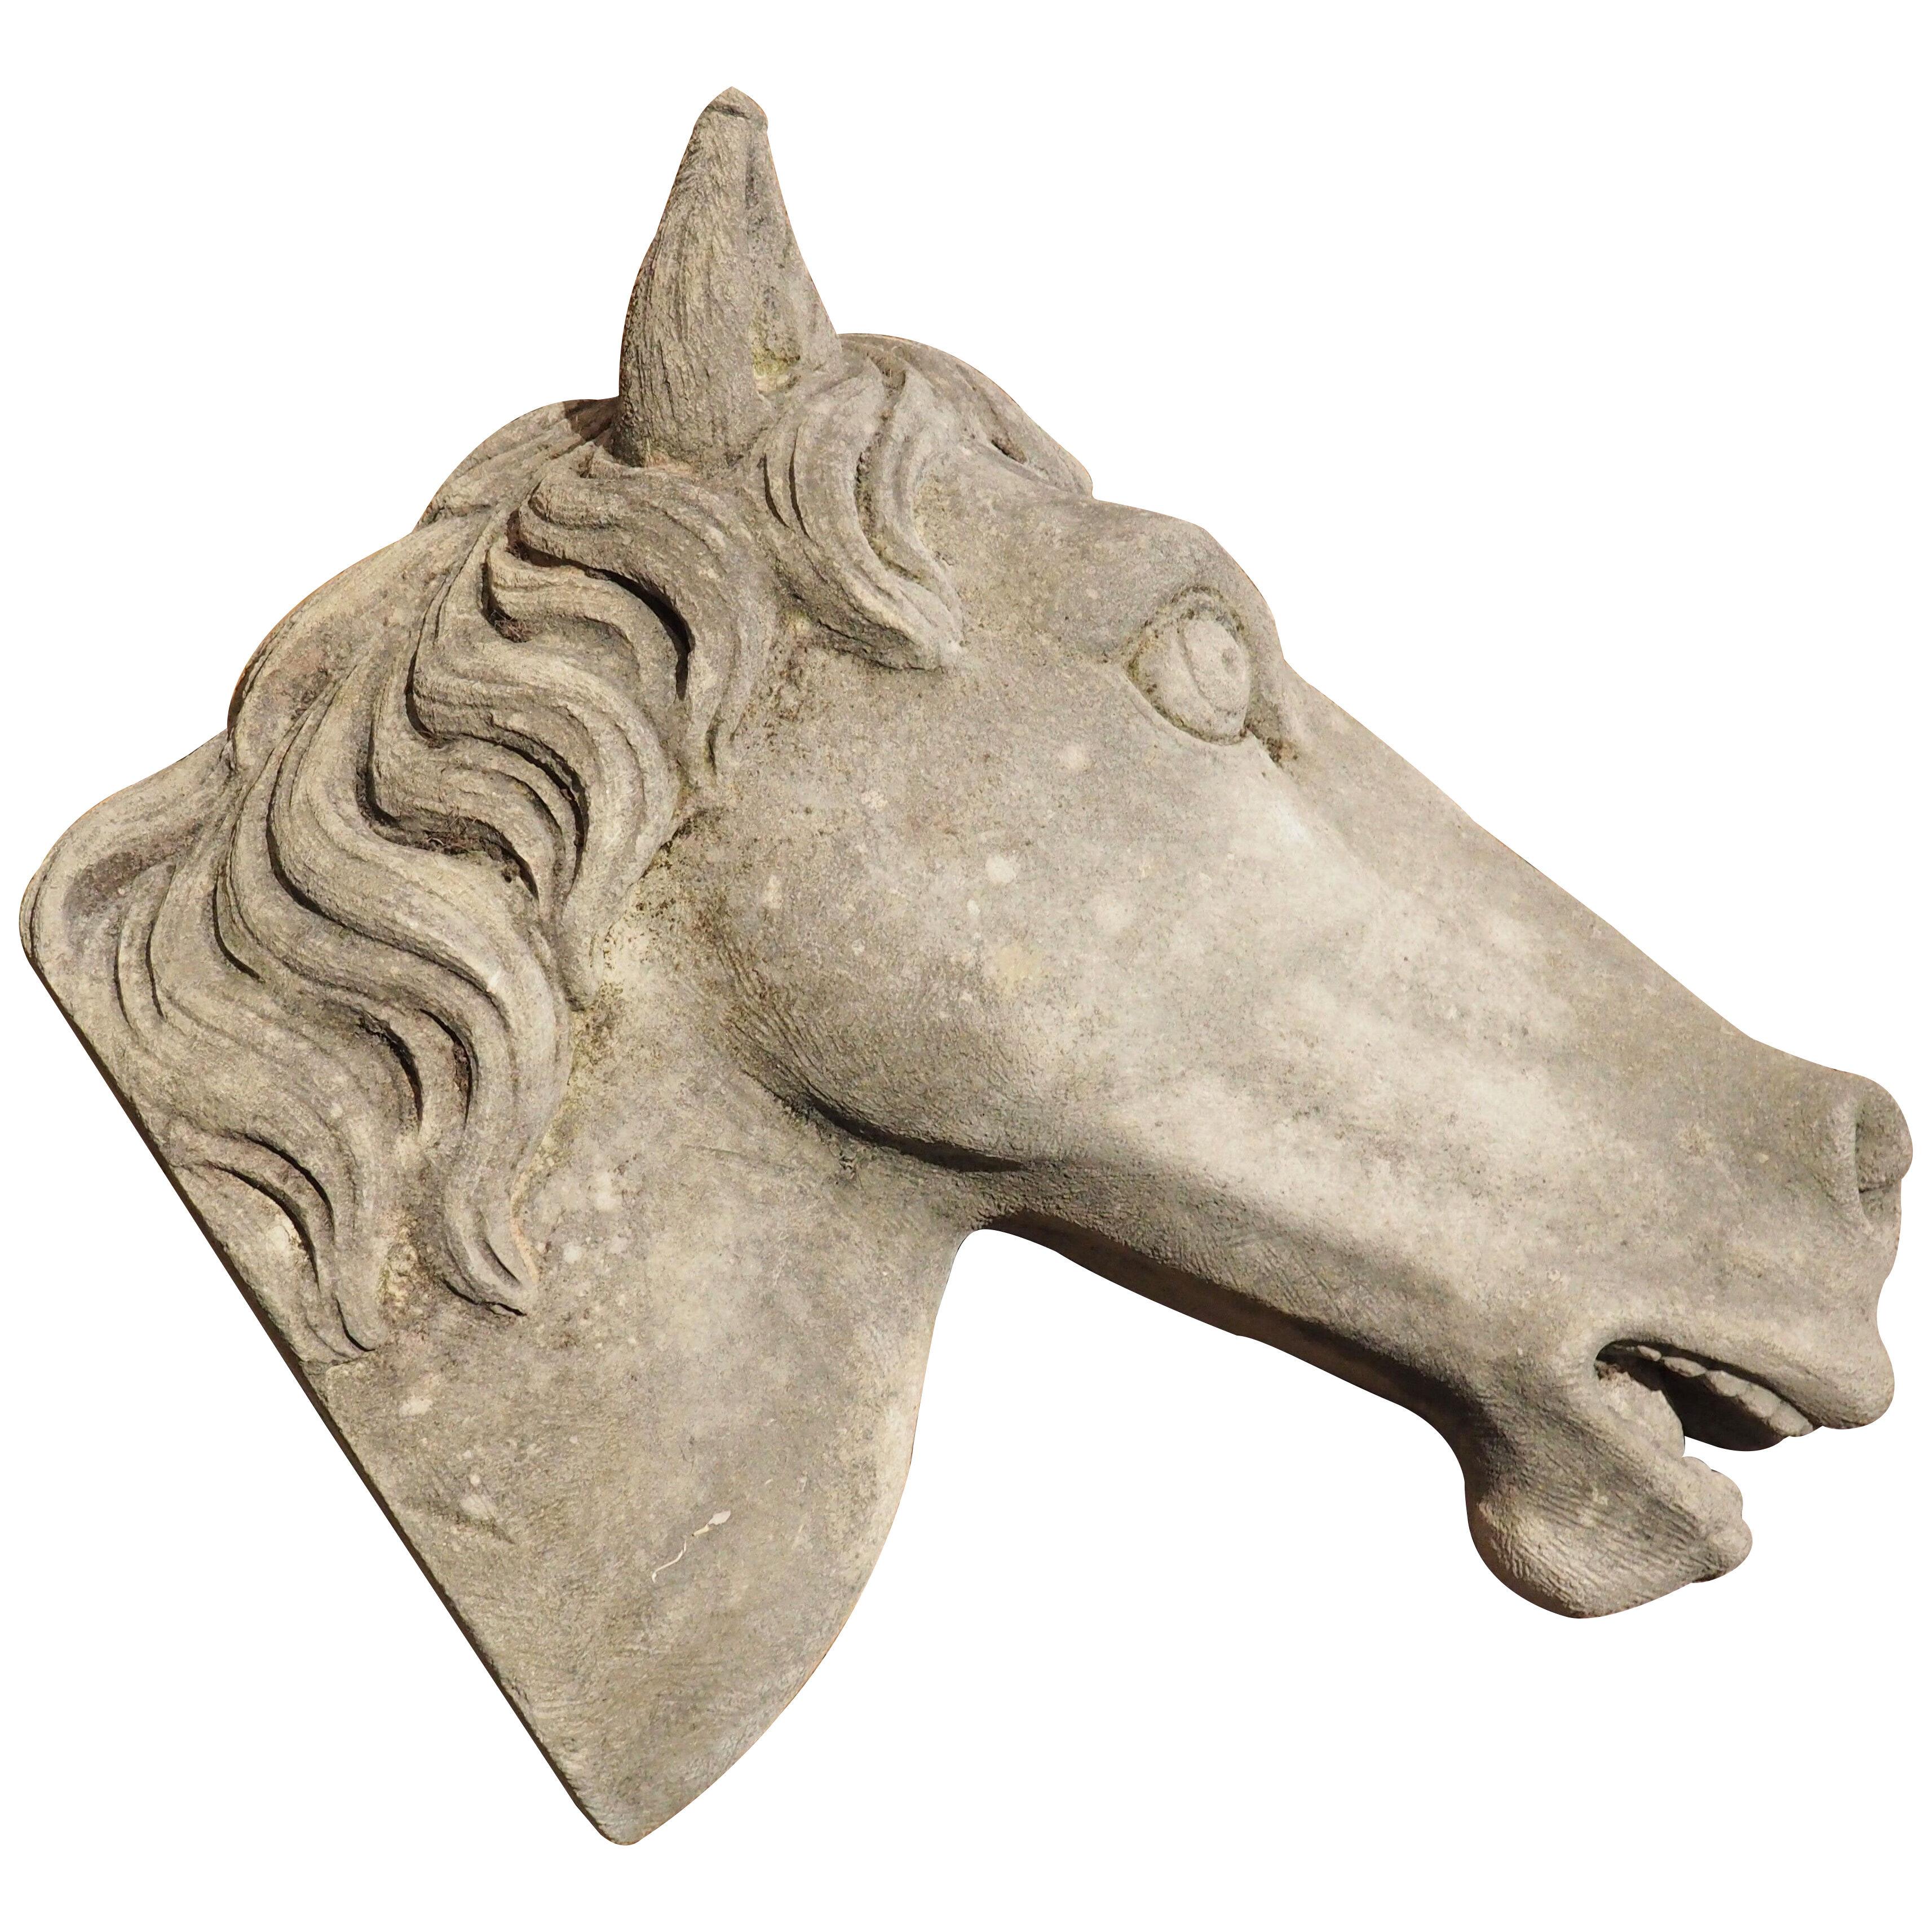 Carved Limestone Horsehead from Italy